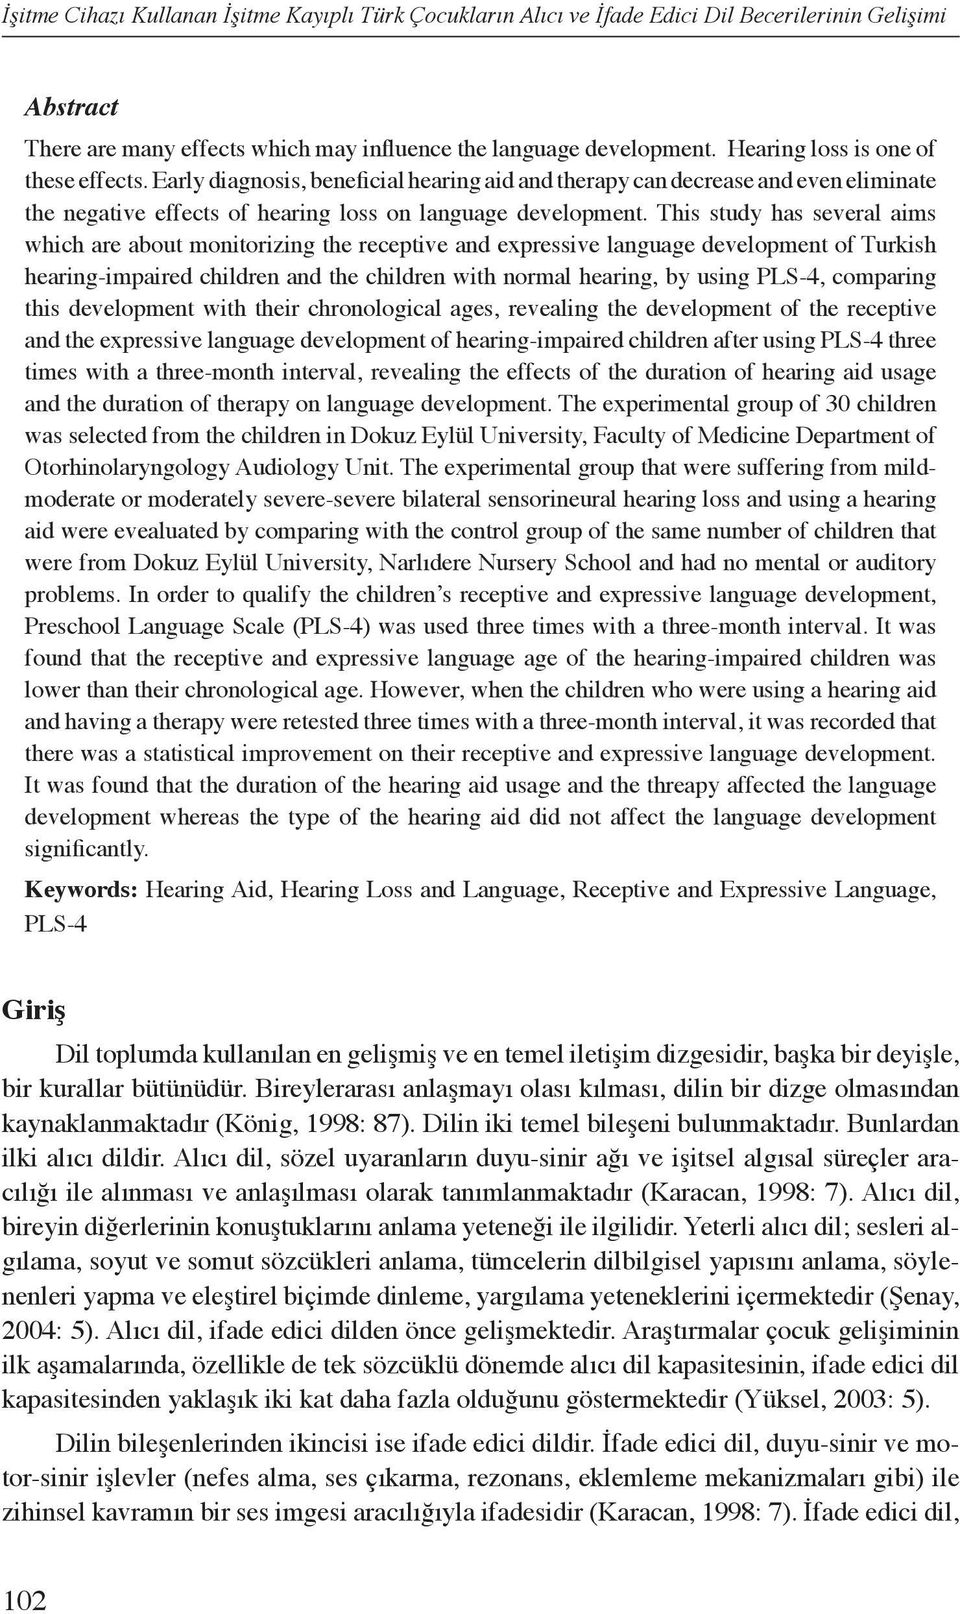 This study has several aims which are about monitorizing the receptive and expressive language development of Turkish hearing-impaired children and the children with normal hearing, by using PLS-4,